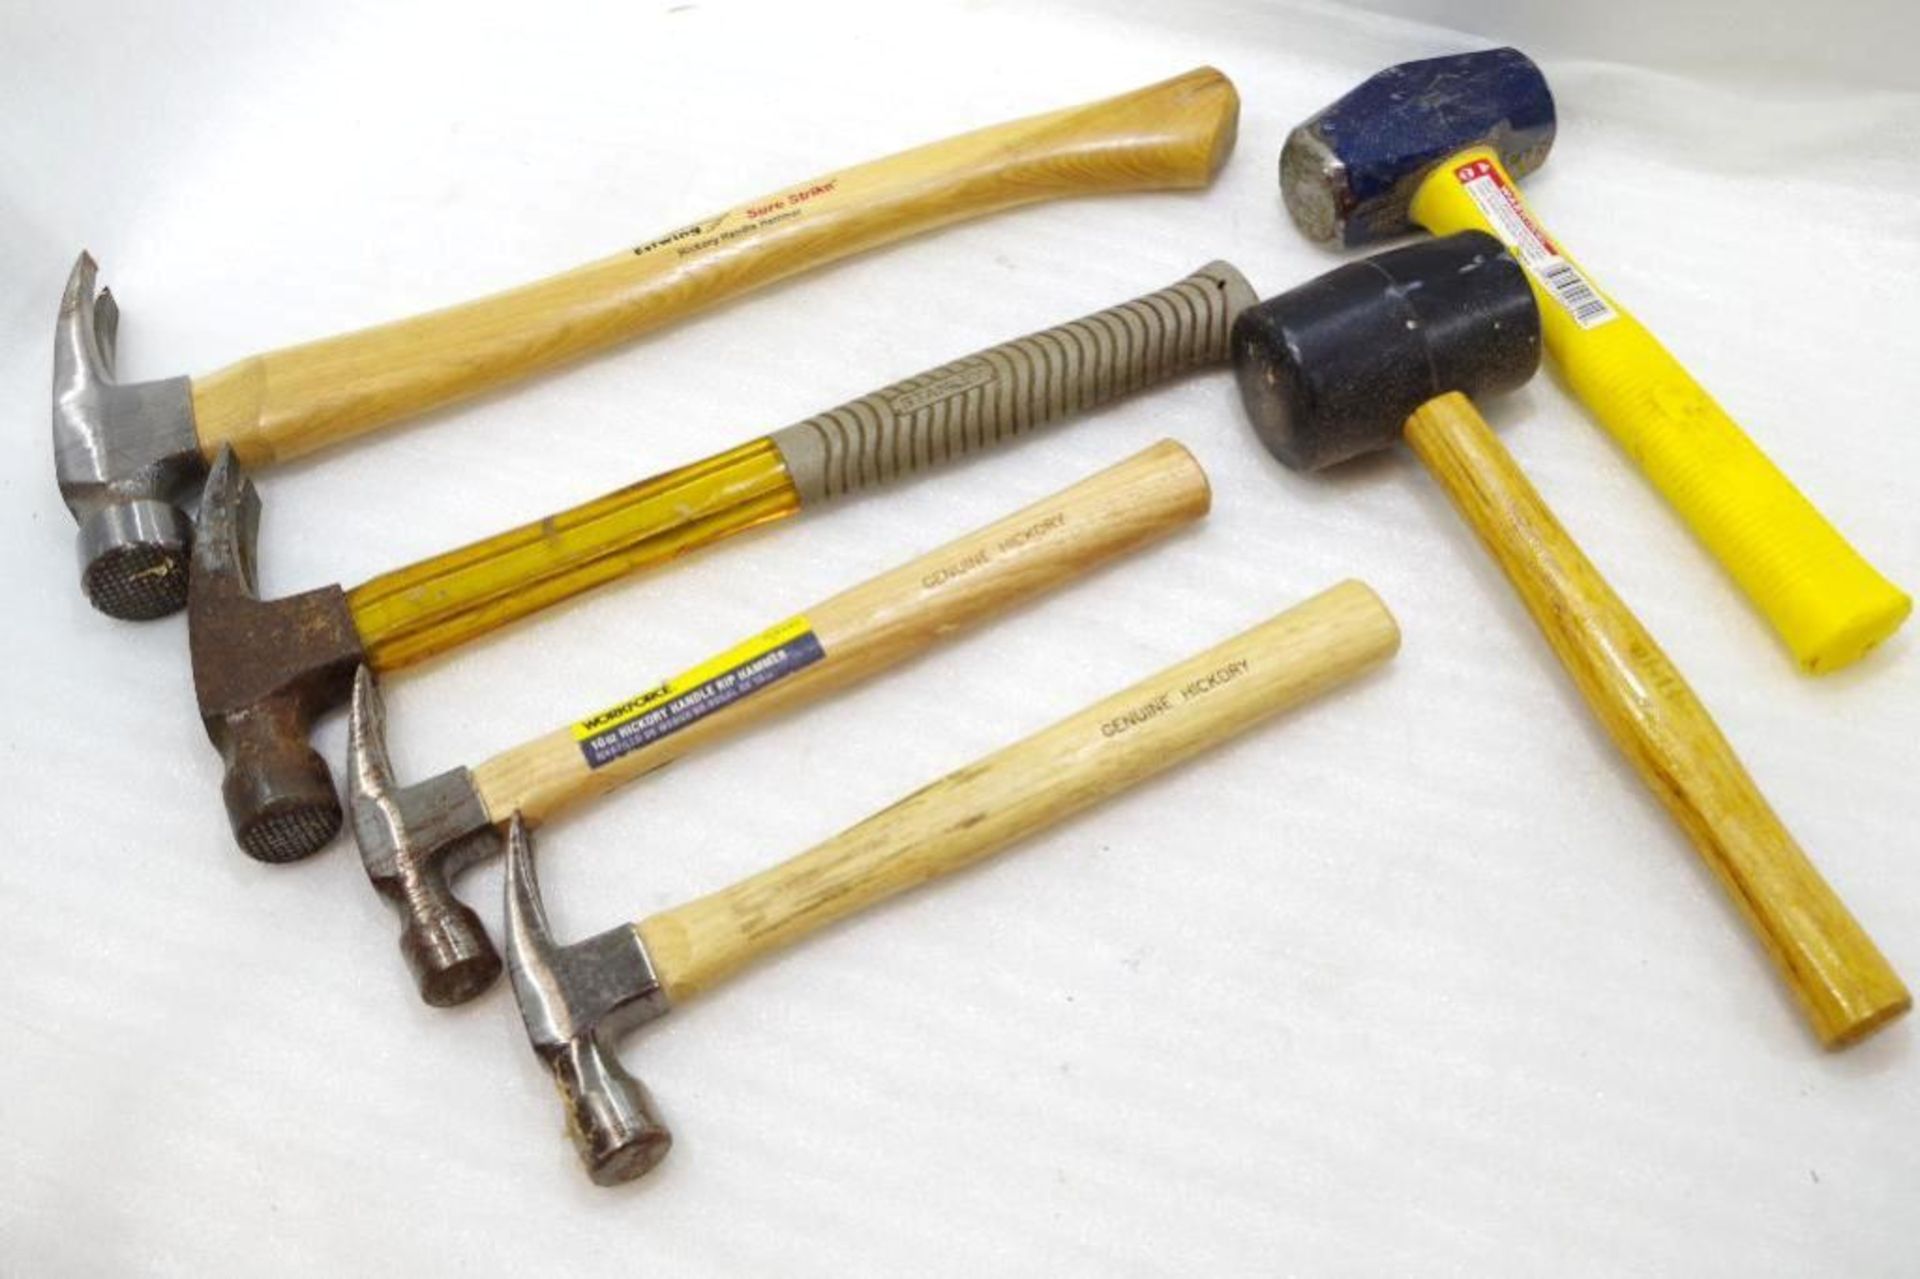 (6) ESTWING, WORKFORCE, STANLEY Hammers - Framing, Claw, Sledge & Mallet